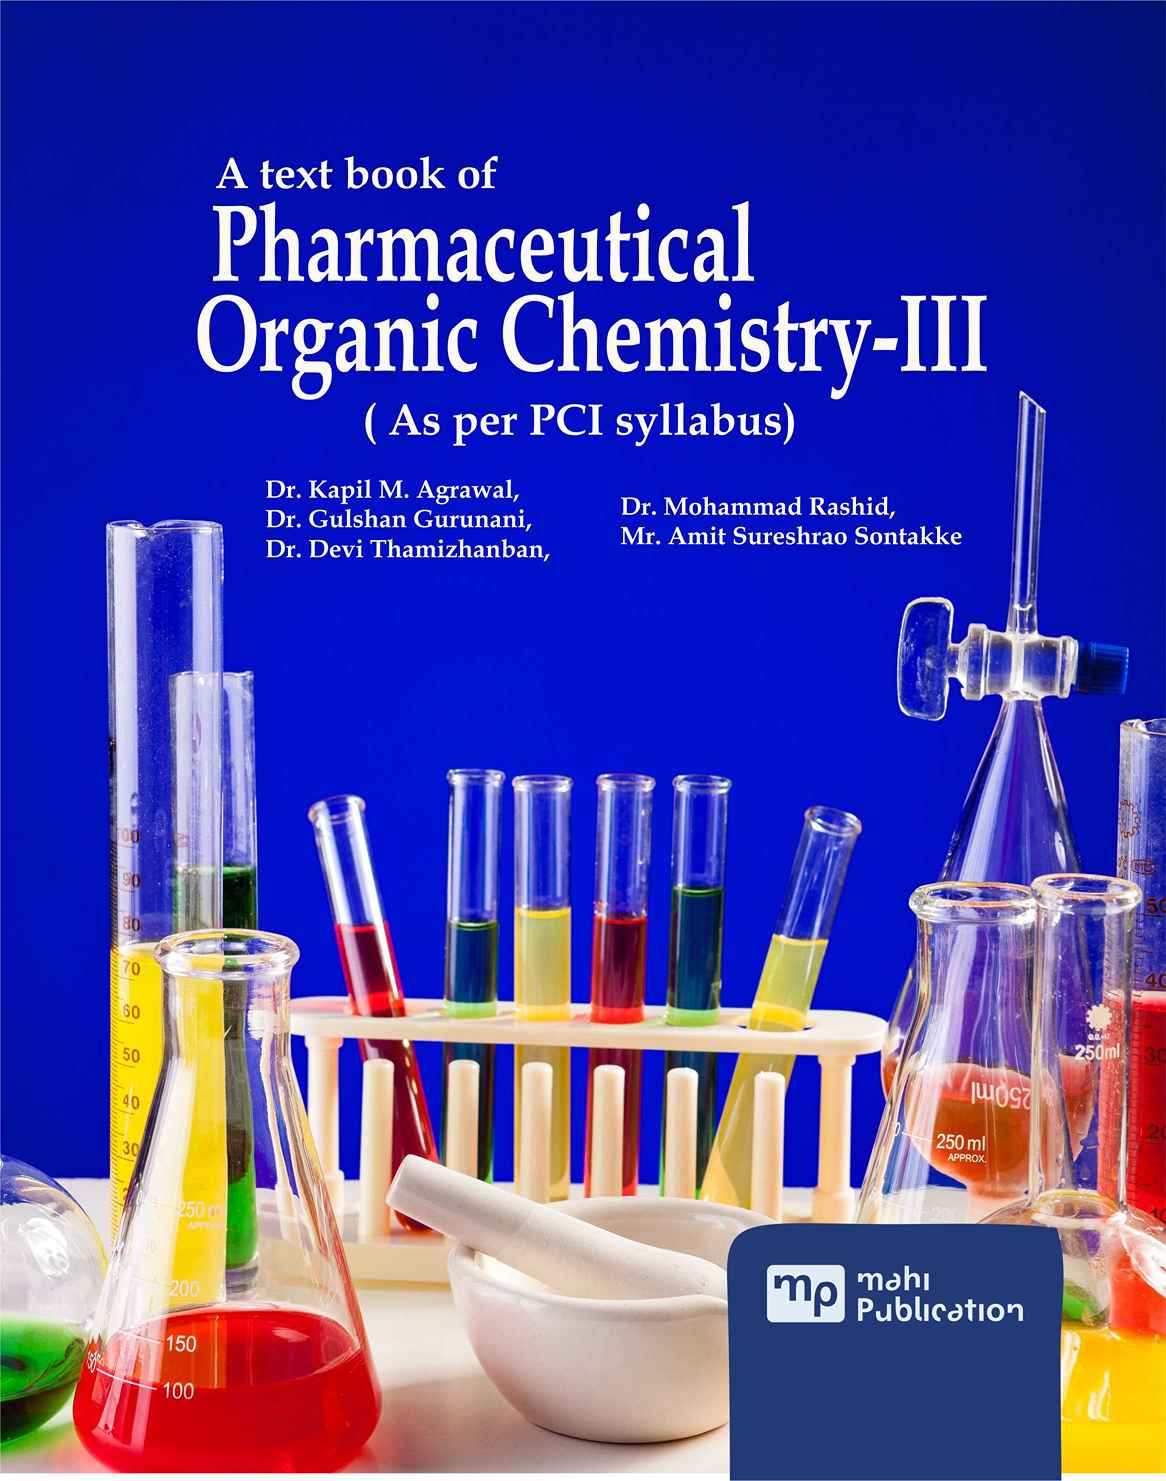 A Text book of Pharmaceutical Organic Chemistry-III ( As per PCI syllabus)